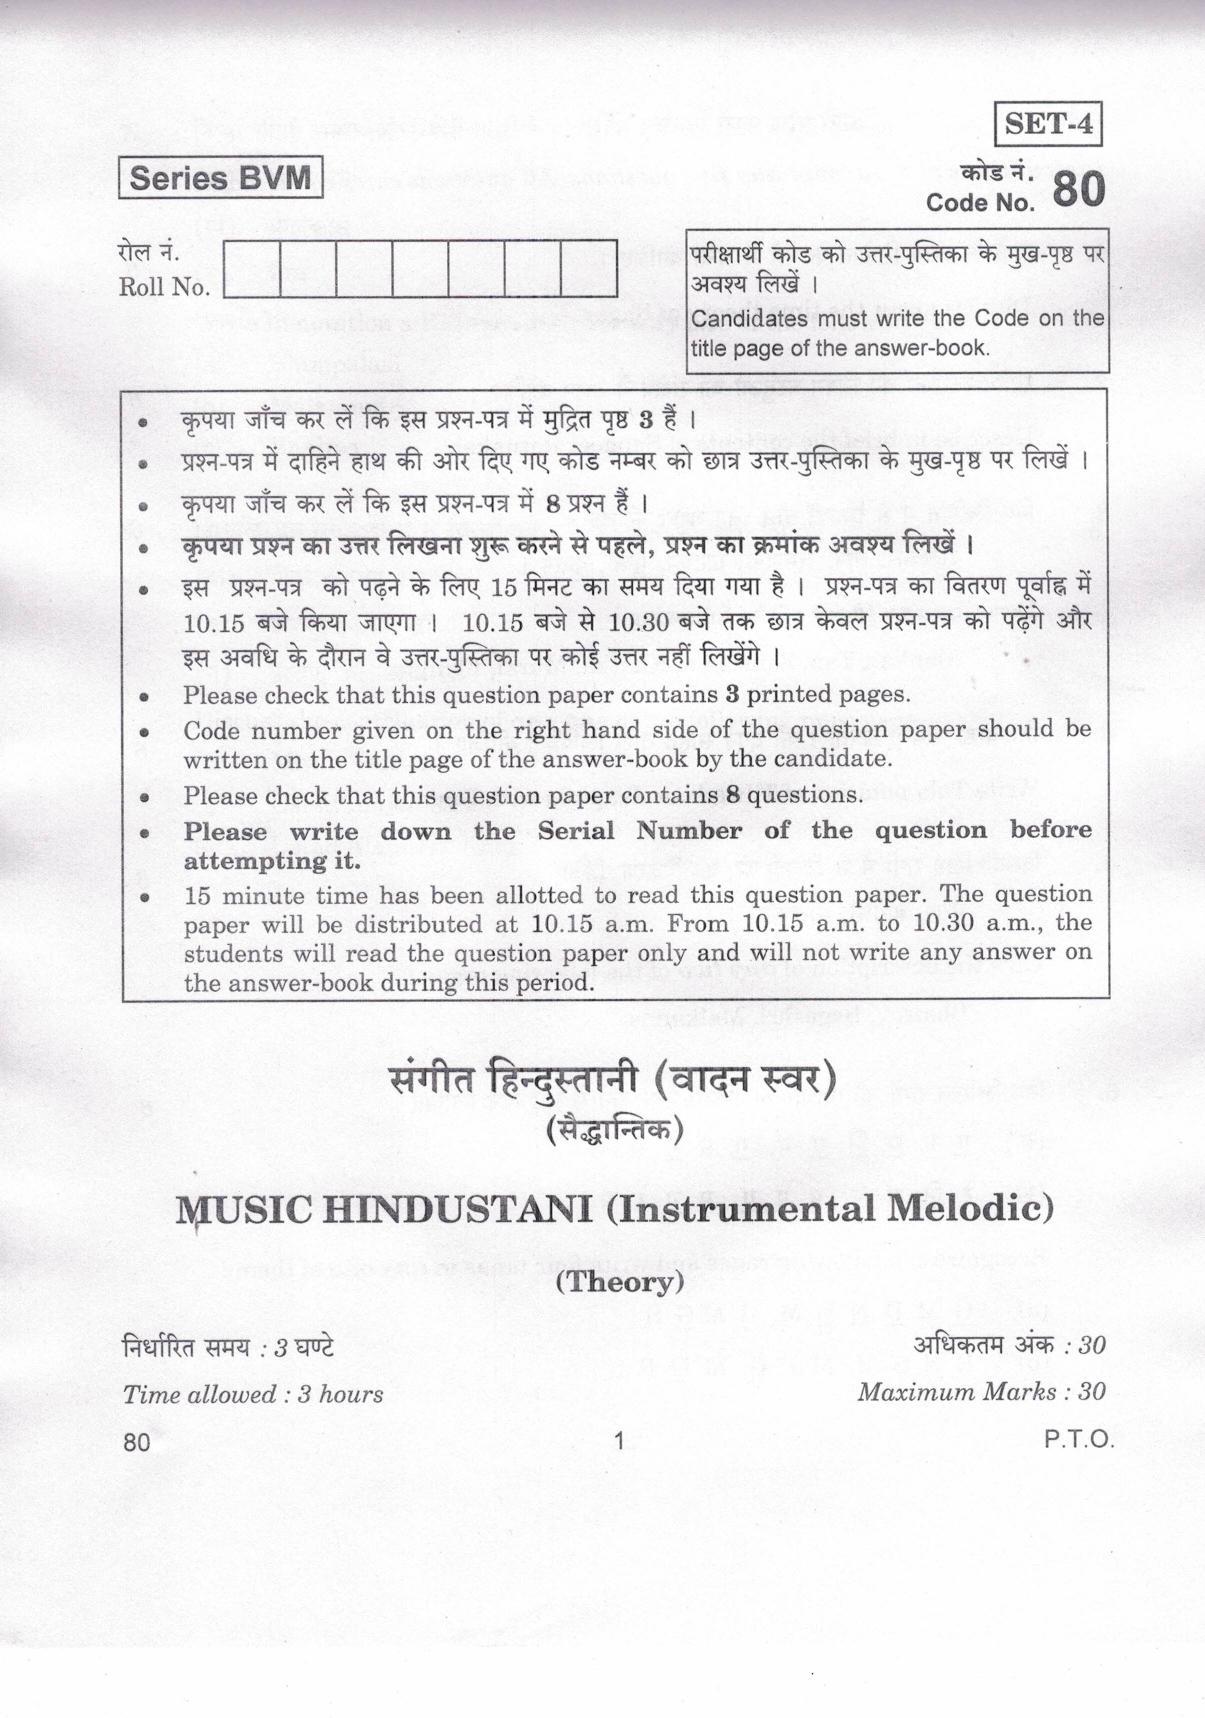 CBSE Class 12 80 Music Hindustani (Instrumental Melodic) 2019 Question Paper - Page 1